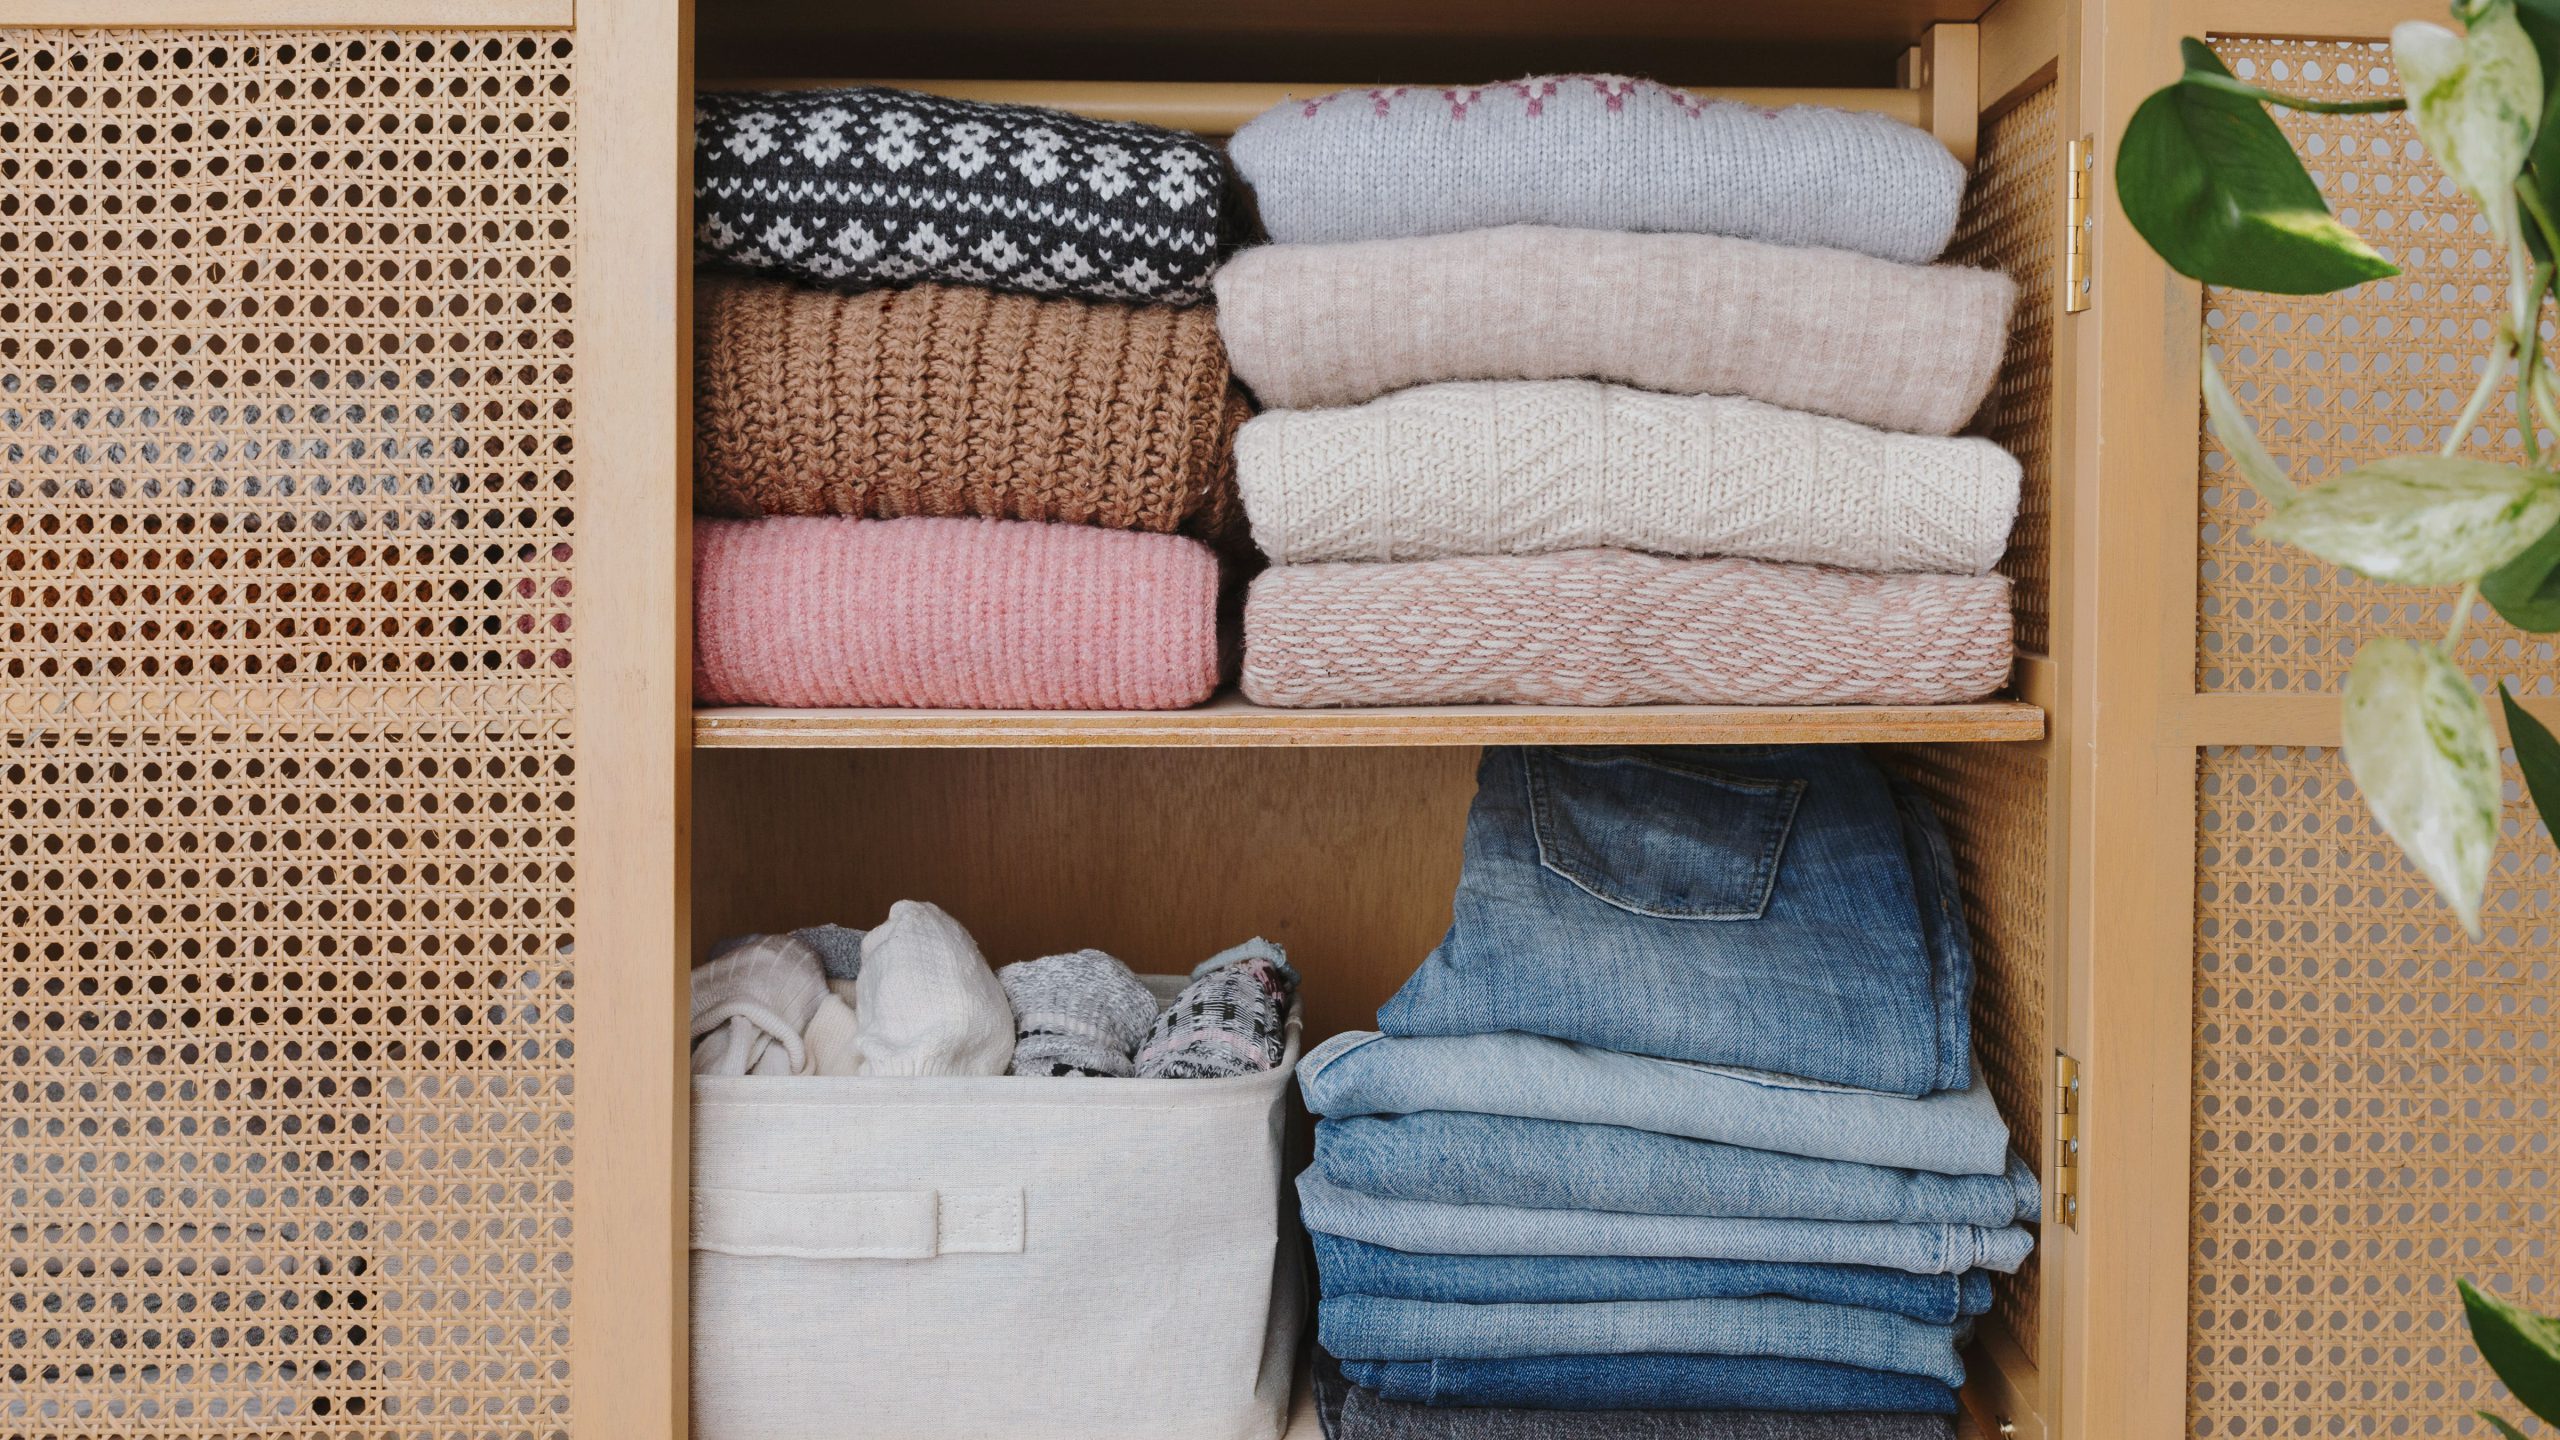 Label Each of Your Items in the Closet